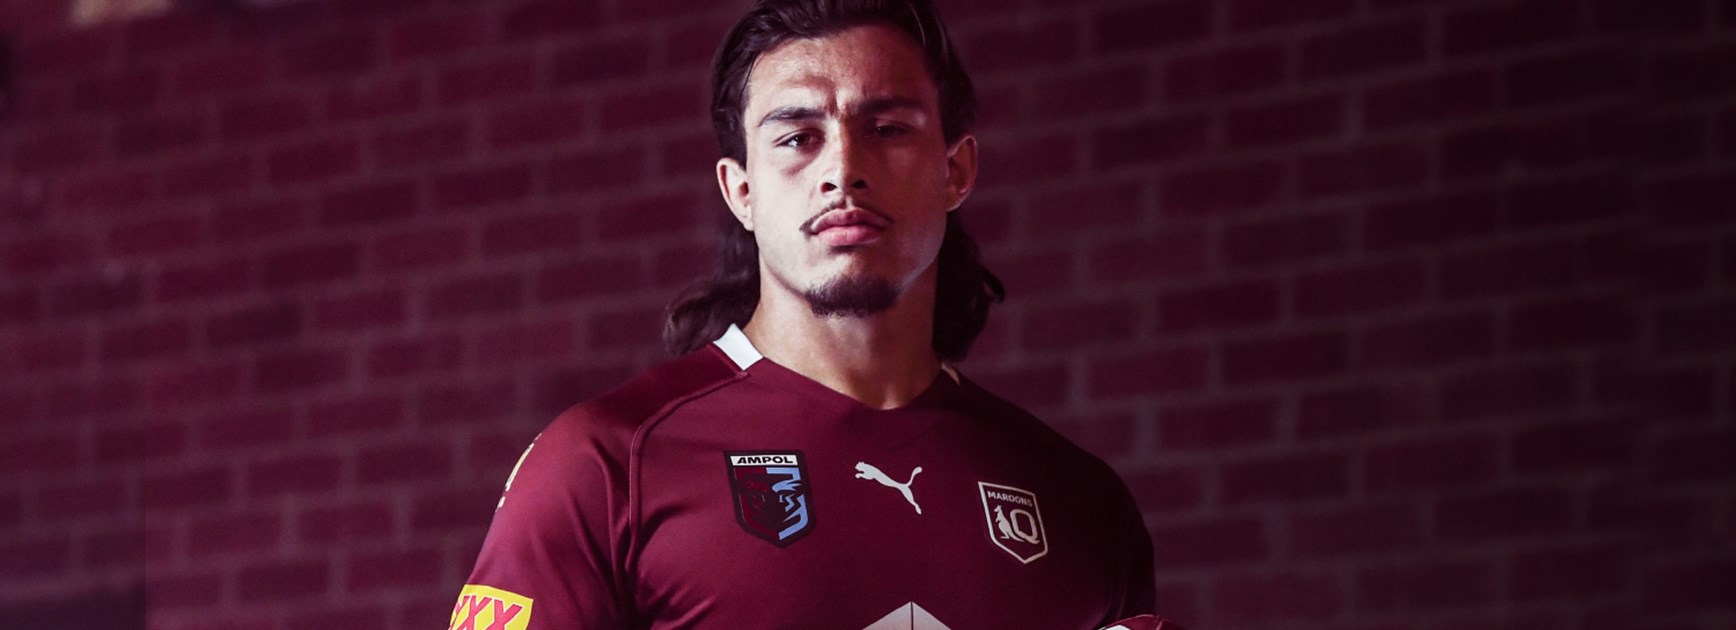 Greats launch new Maroons jersey